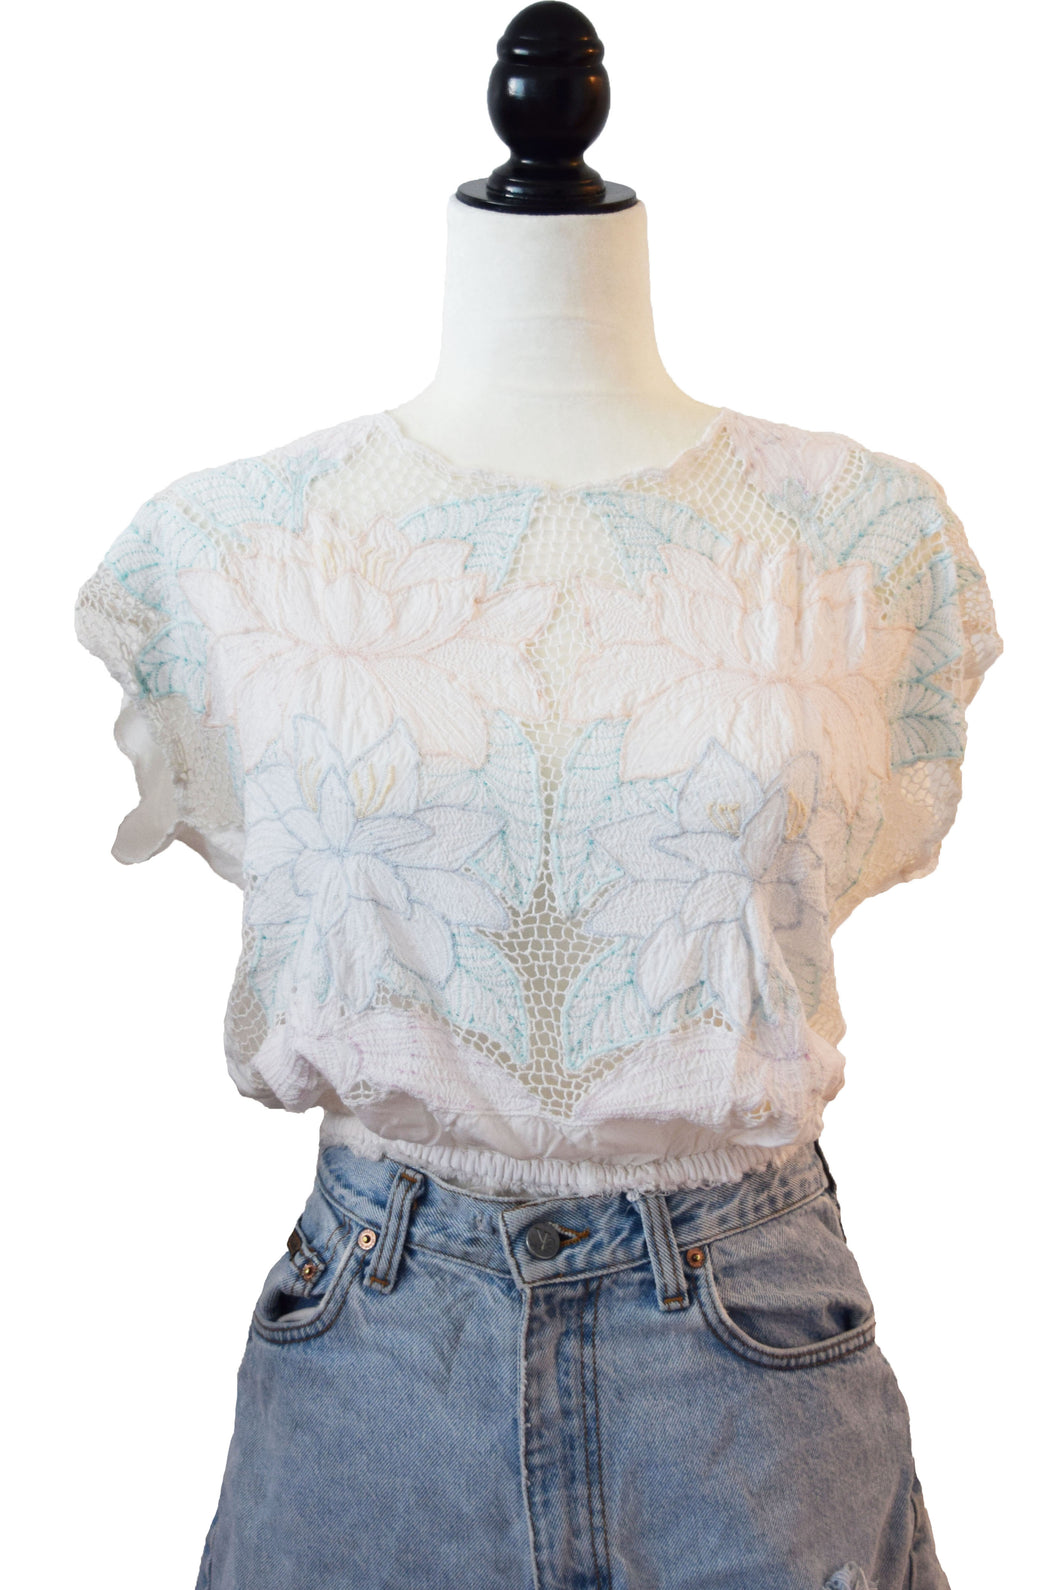 80's Lace Pastel Tee